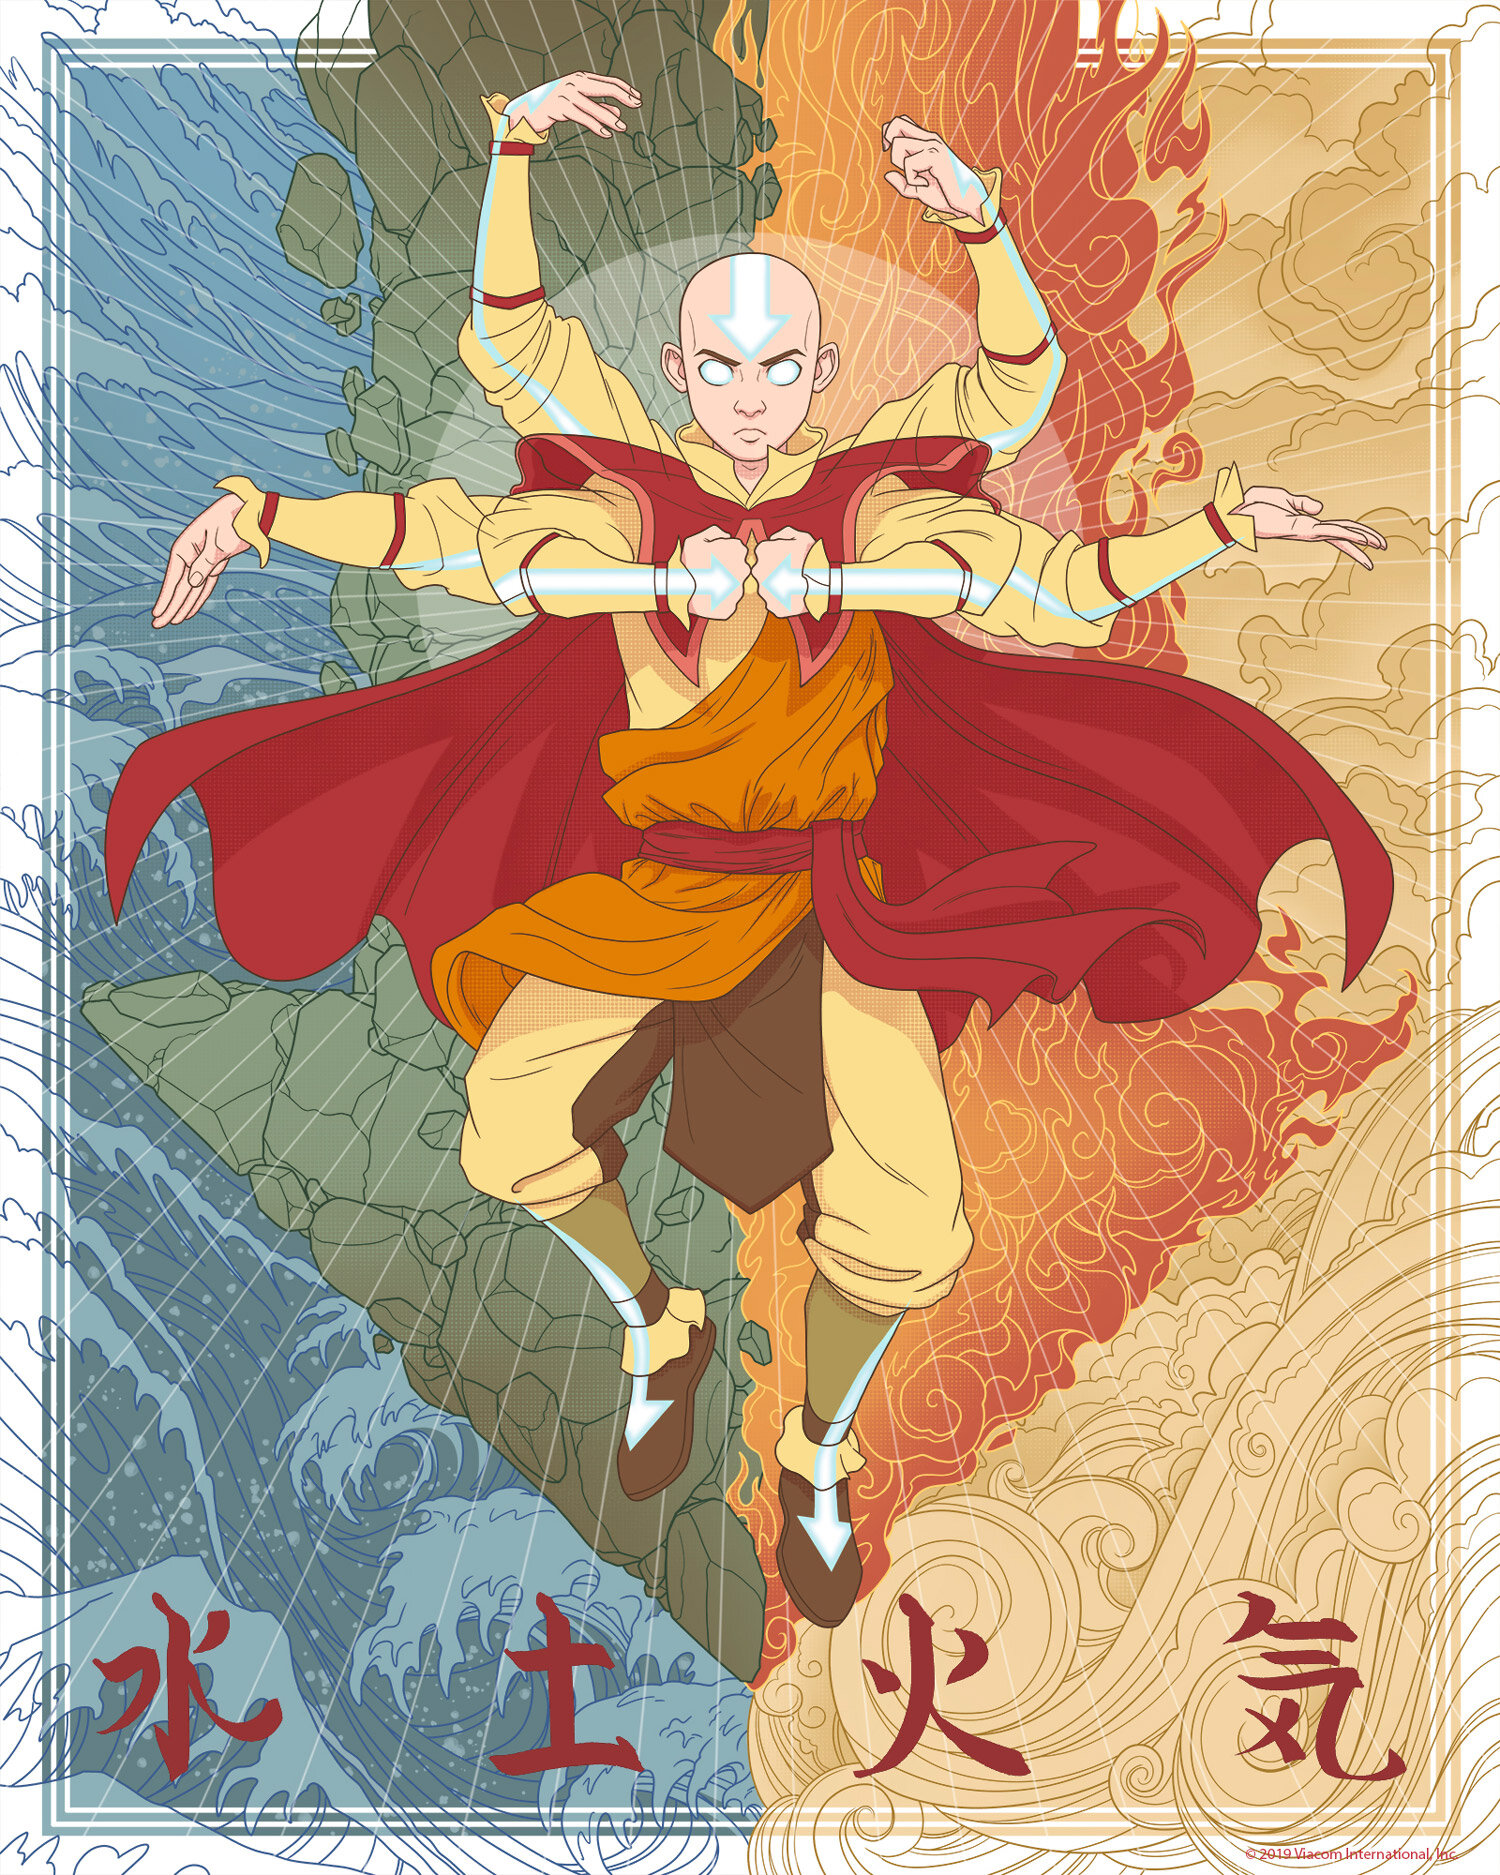 Regardless of the fact that Aang isnt smileing while meditating this is a  great tattoo  Avatar tattoo Tattoos Body art tattoos